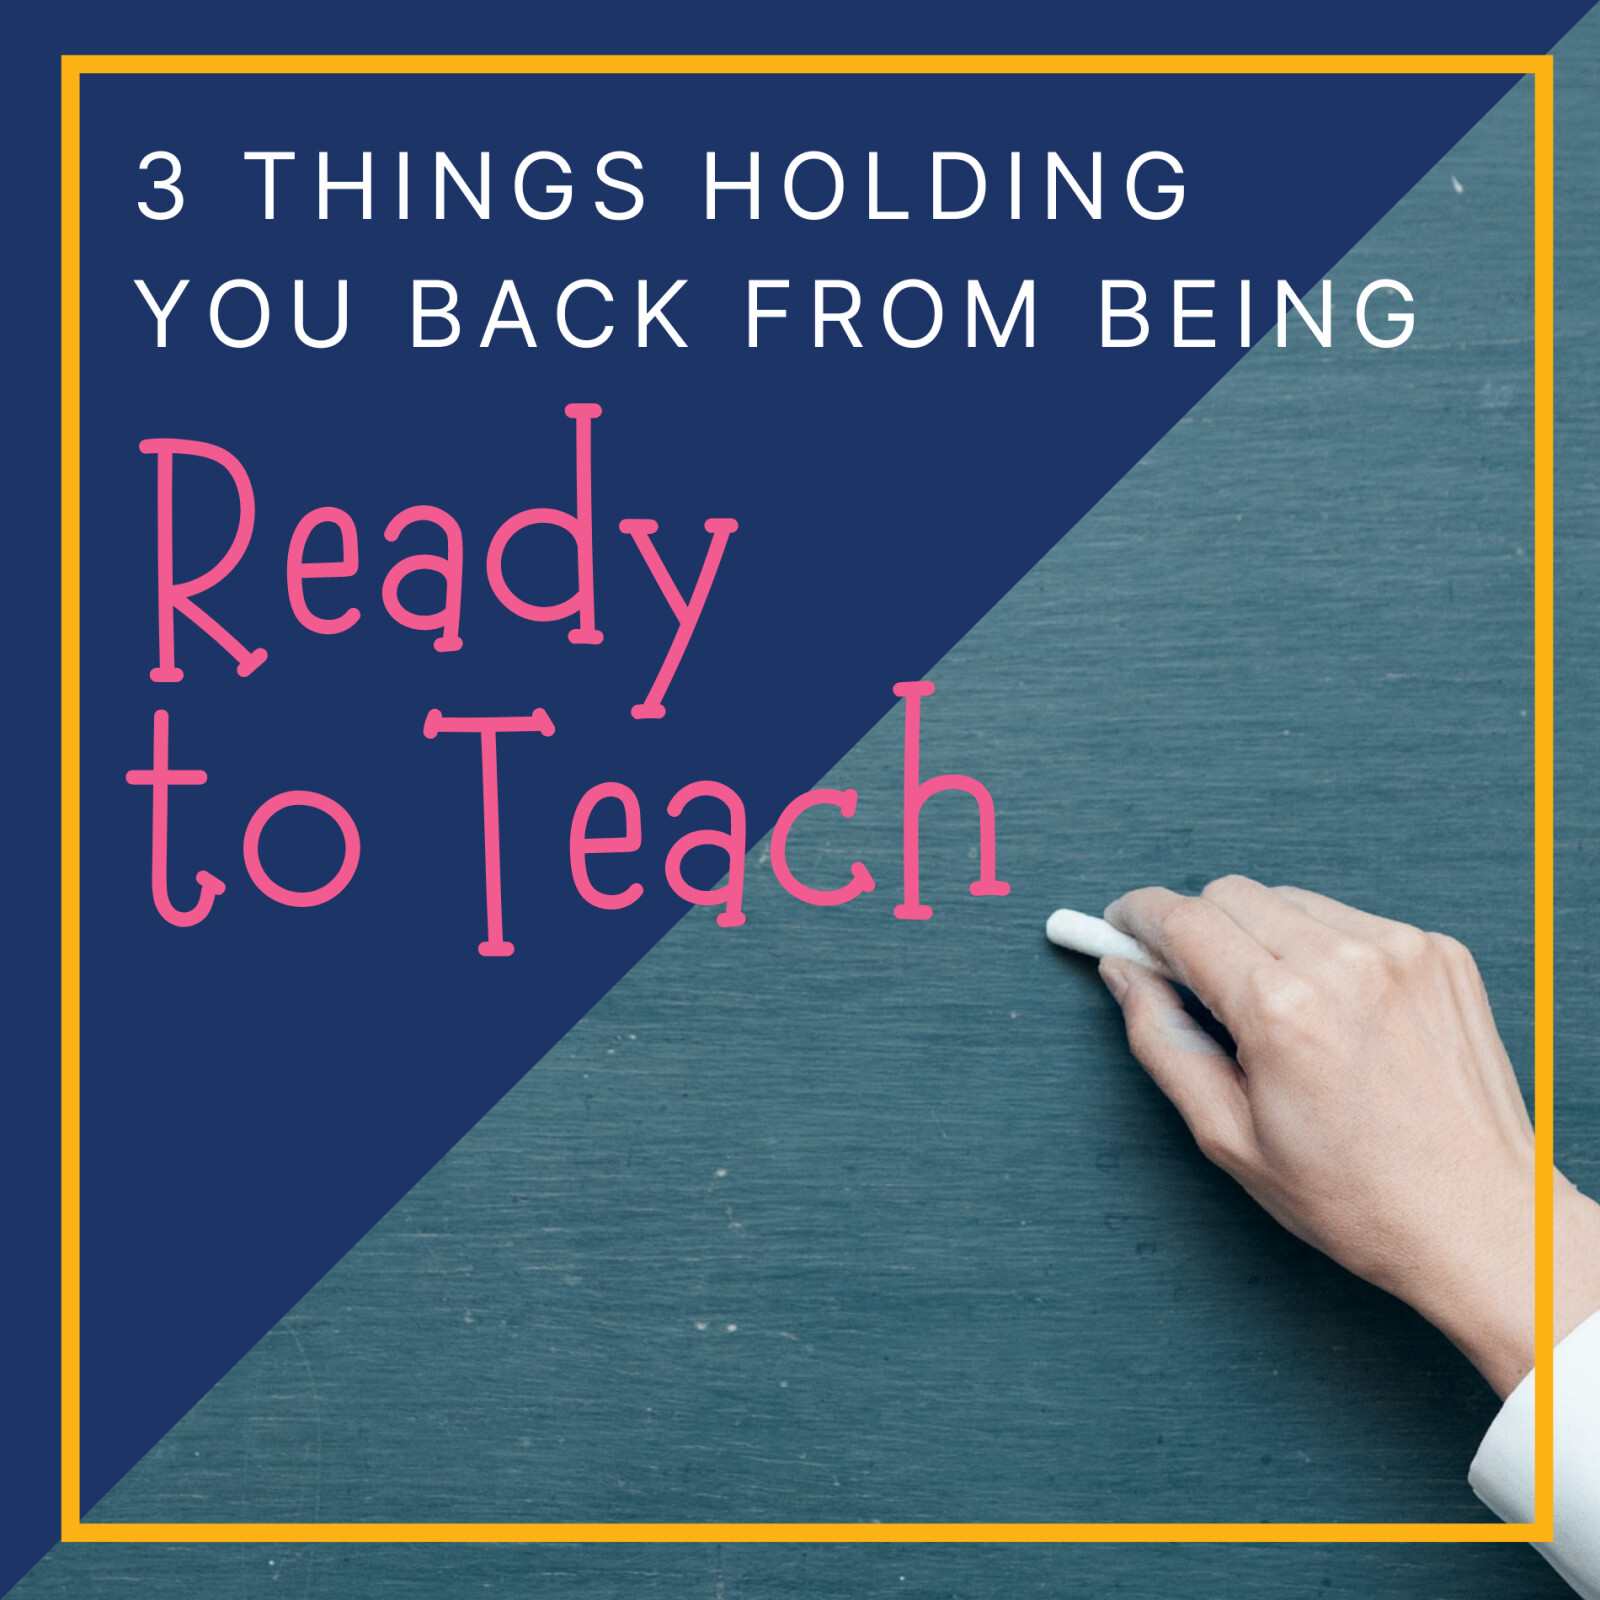 3 Things Holding You Back from Being Ready to Teach